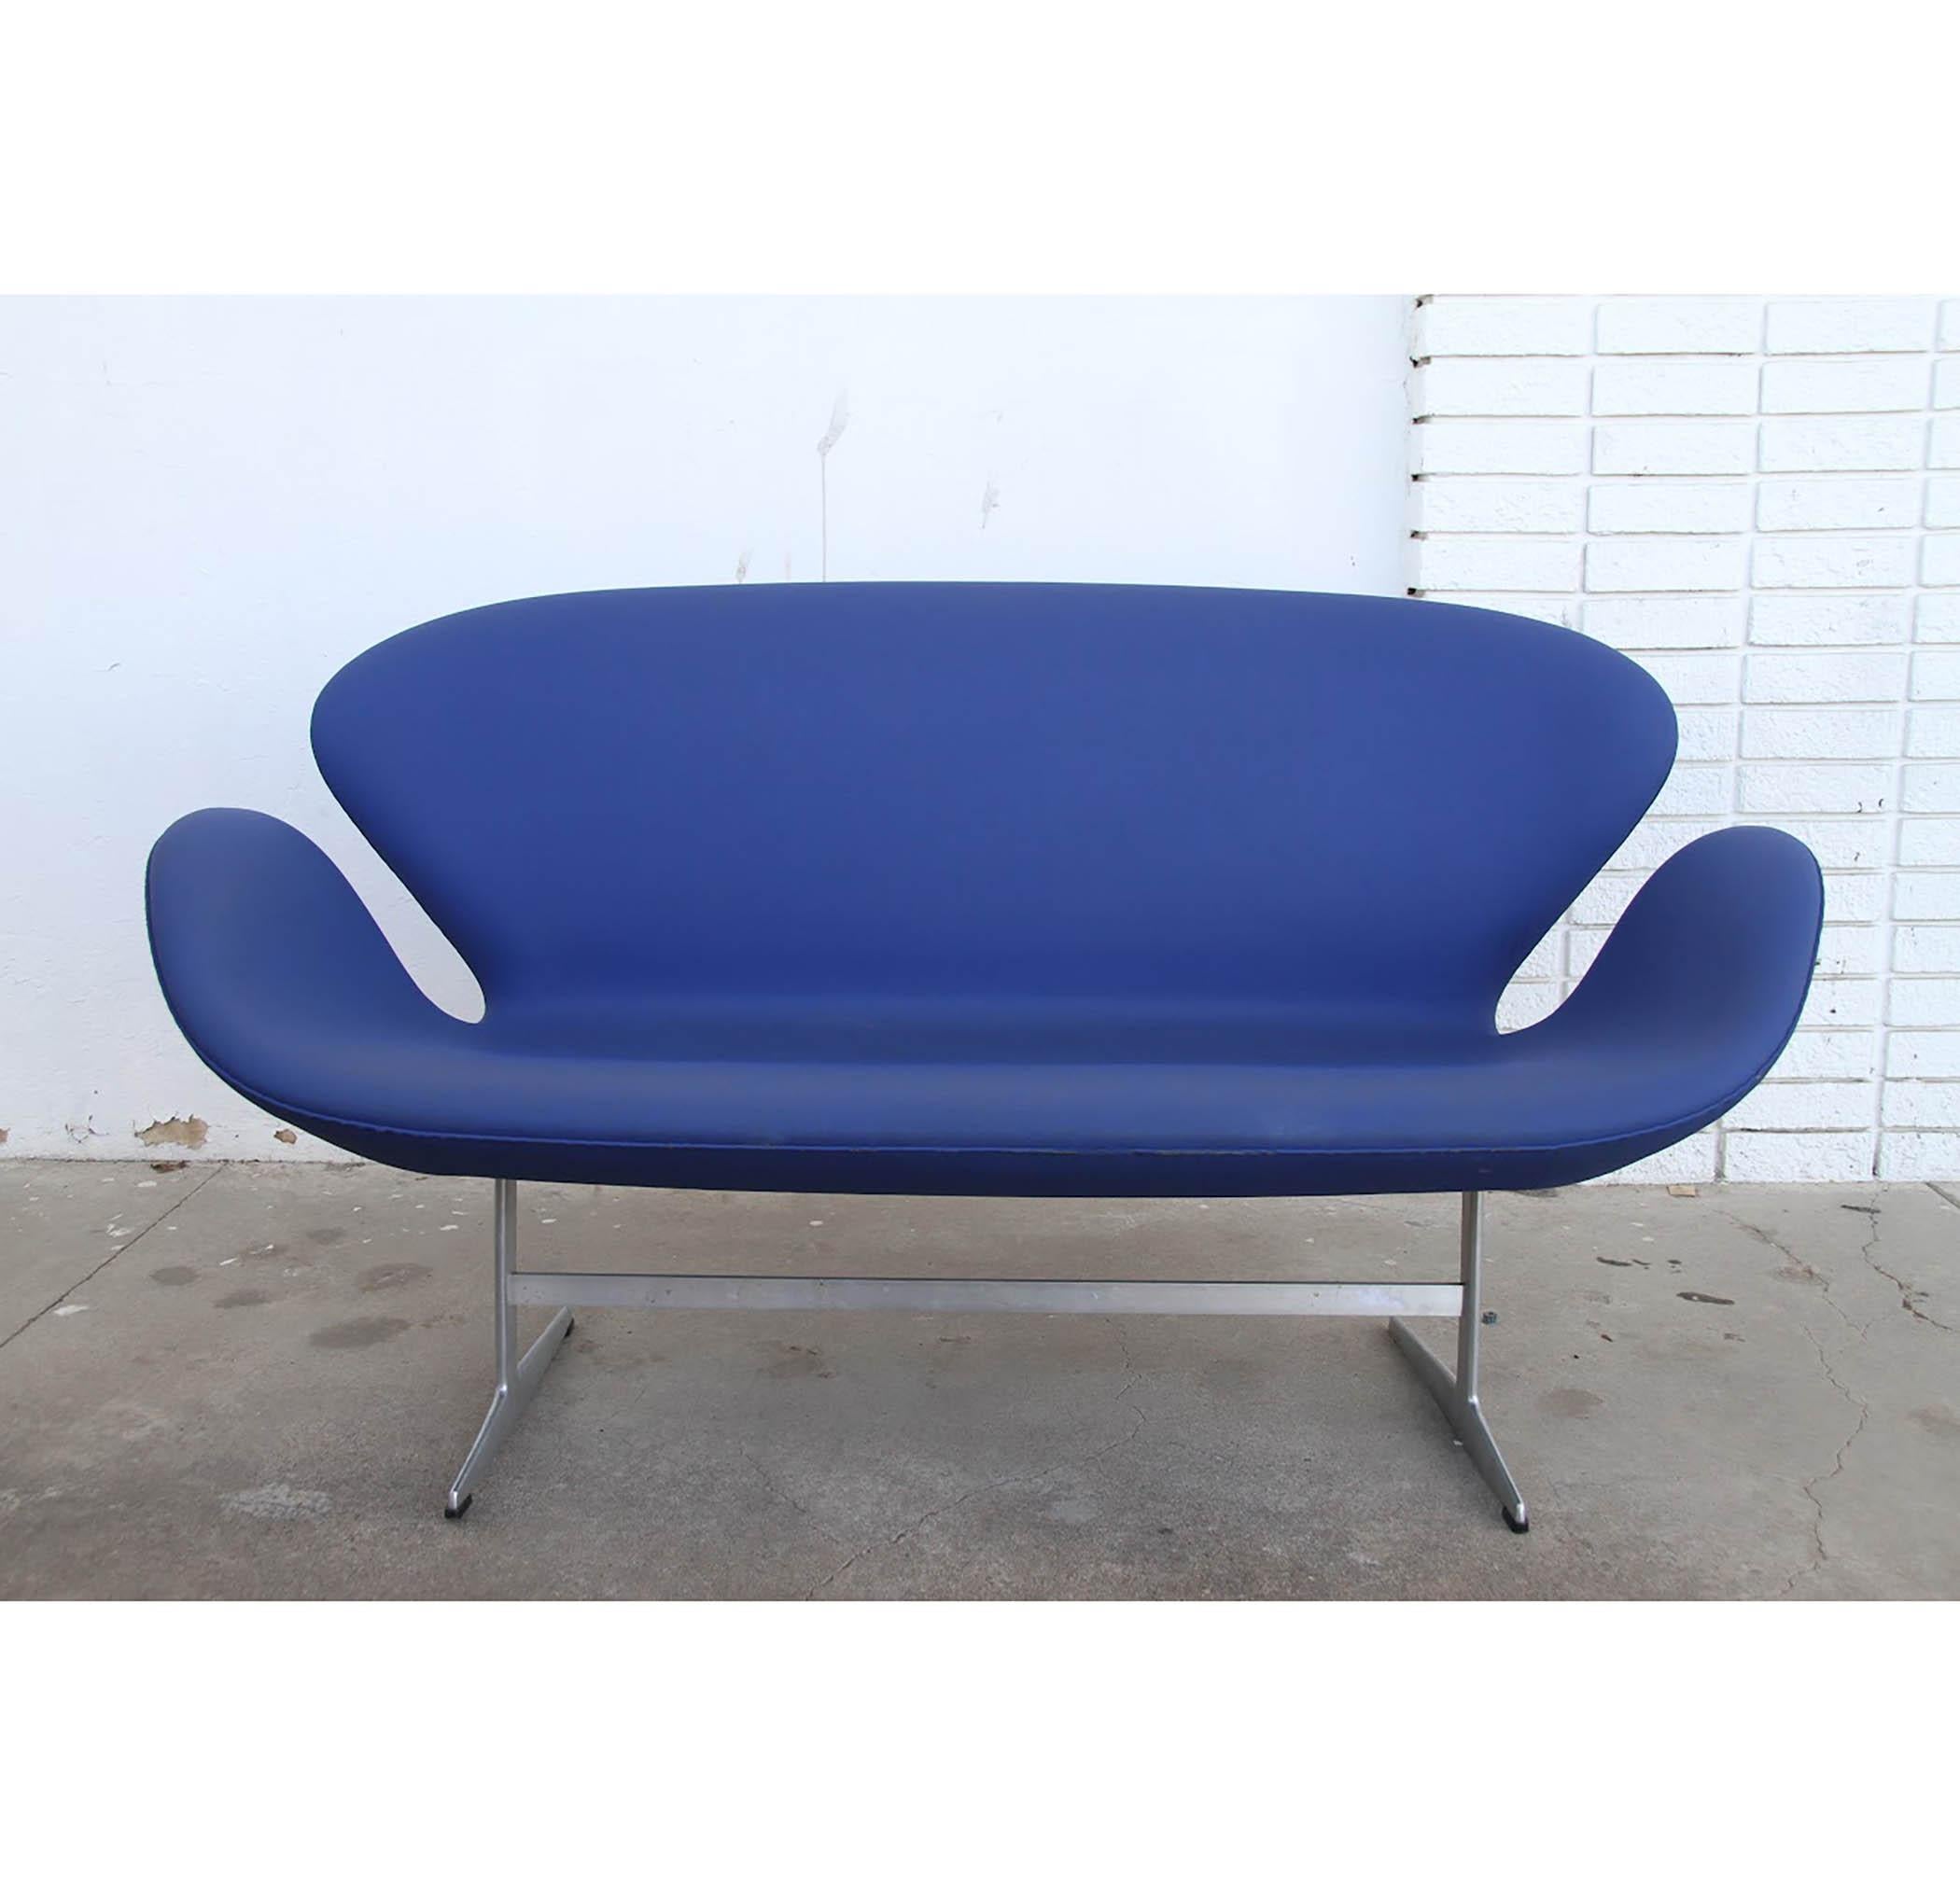 Originally designed for the SAS Royal Hotel in Copenhagen, the Swan sofa by Danish design pioneer, Arne Jacobsen, has become iconic and synonymous with Danish Modern. 

Loveseat in original hand stiched blue naugahyde upholstery designed by Arne